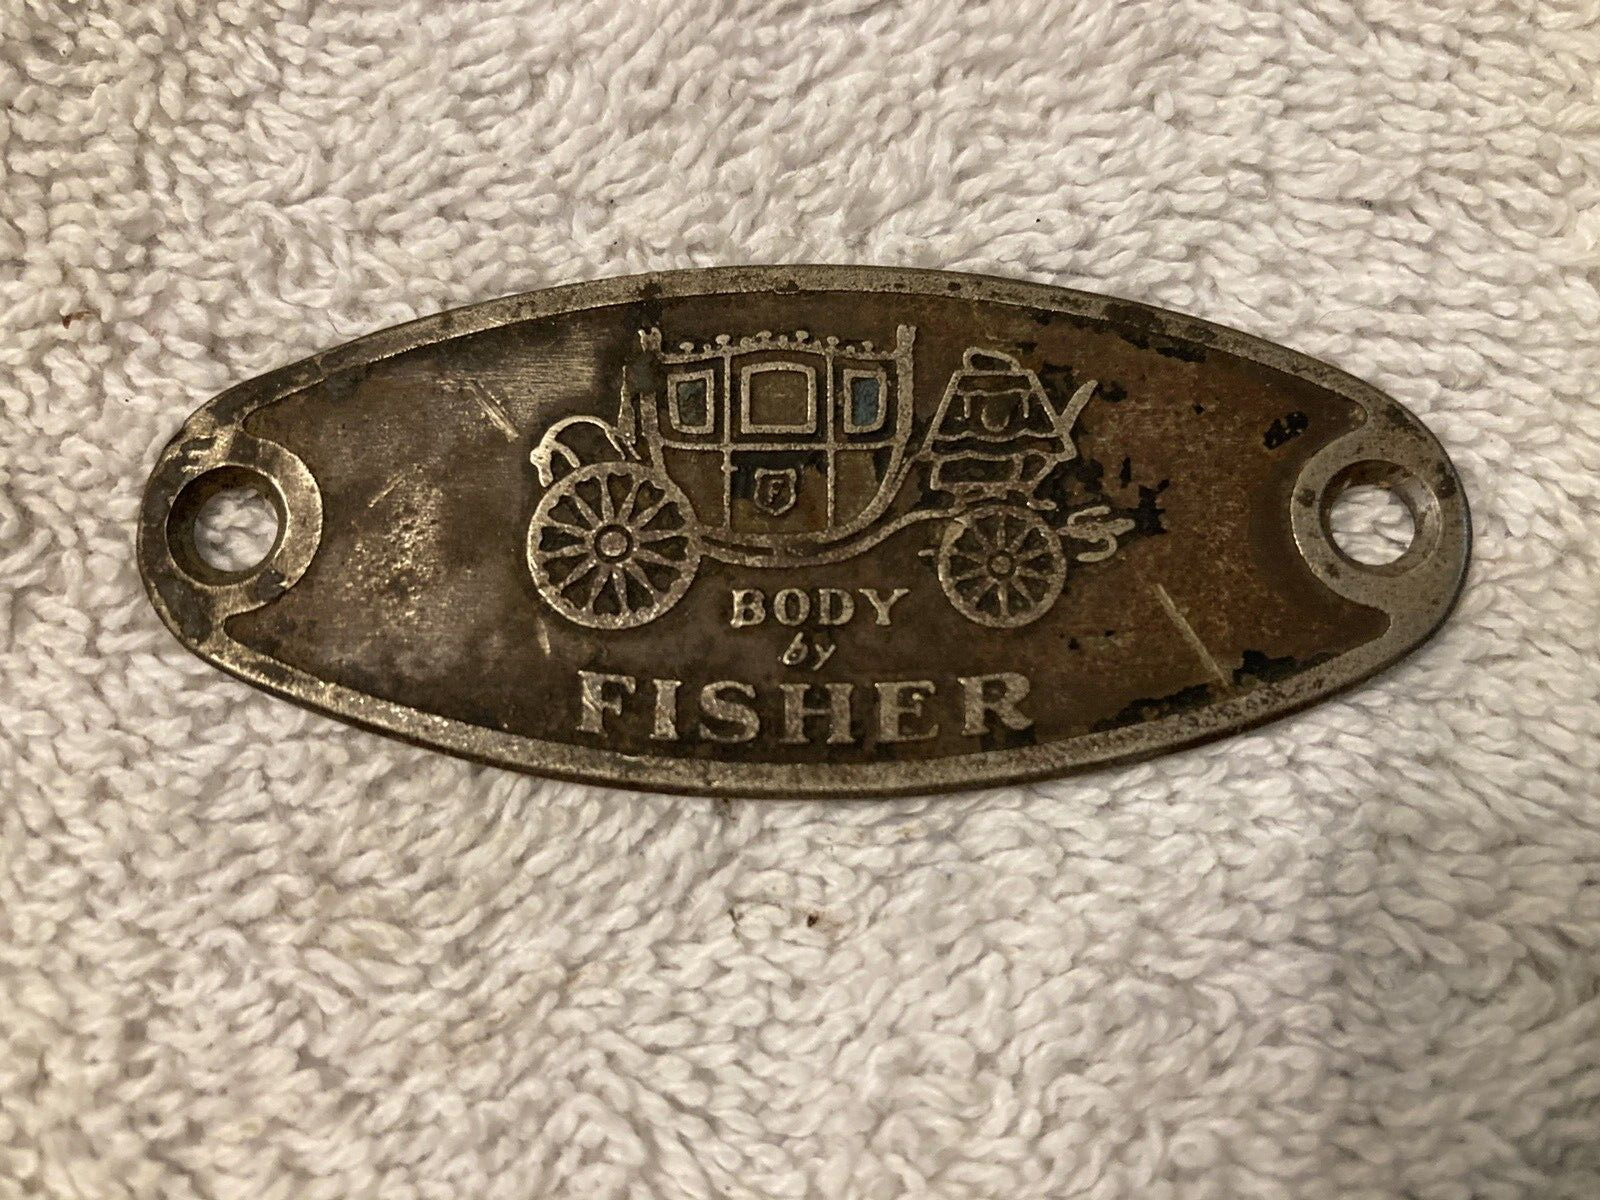 Vintage c.1930-50 BODY BY FISHER Body Tag ID General Motors GM Coachmaker Badge